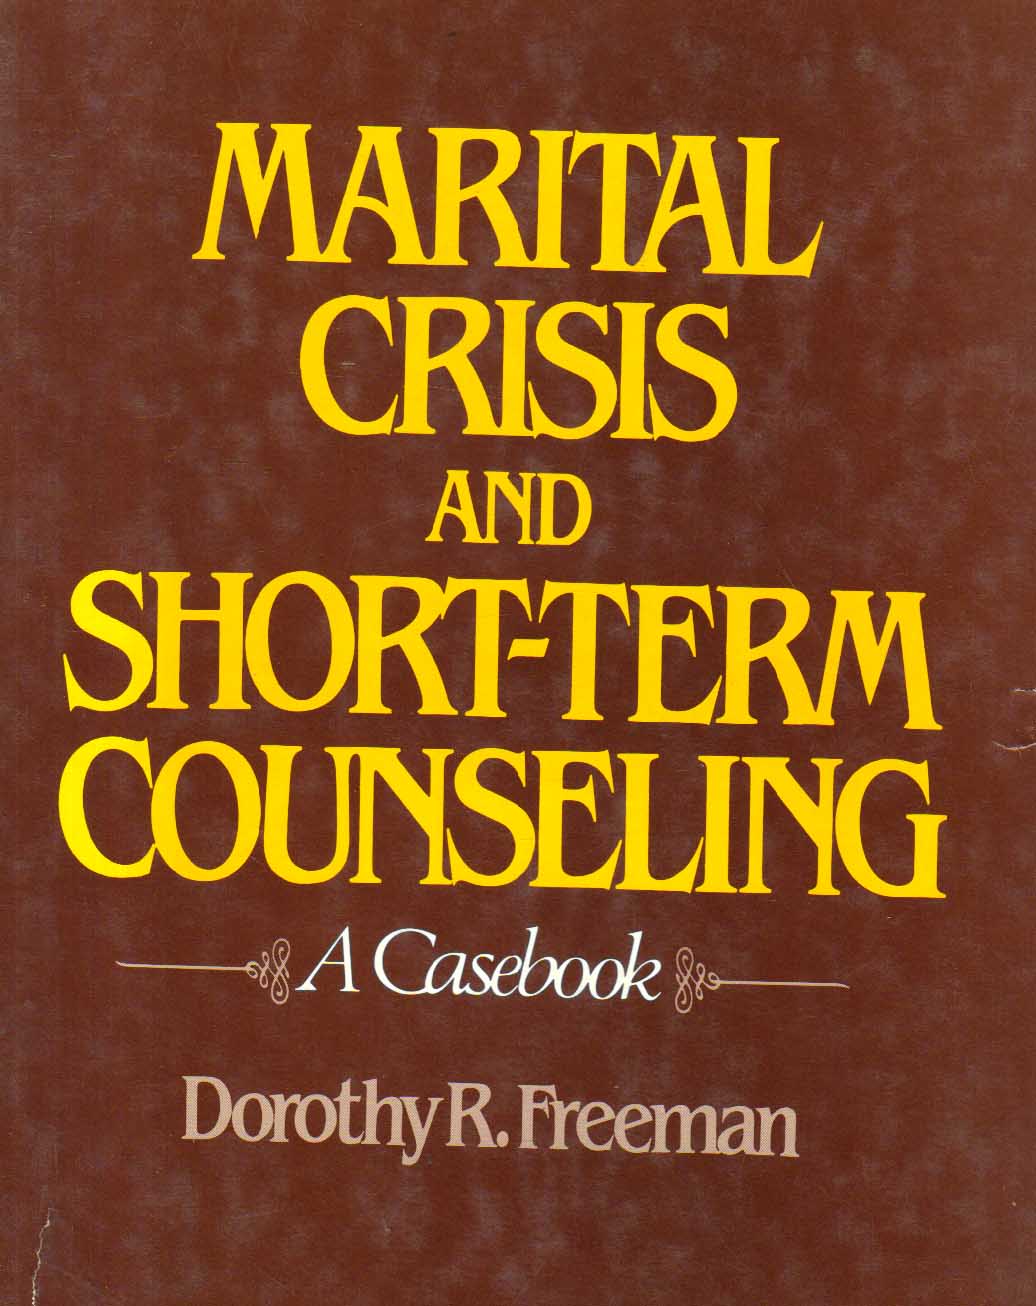 Marital Crisis and Short-Term Counseling.